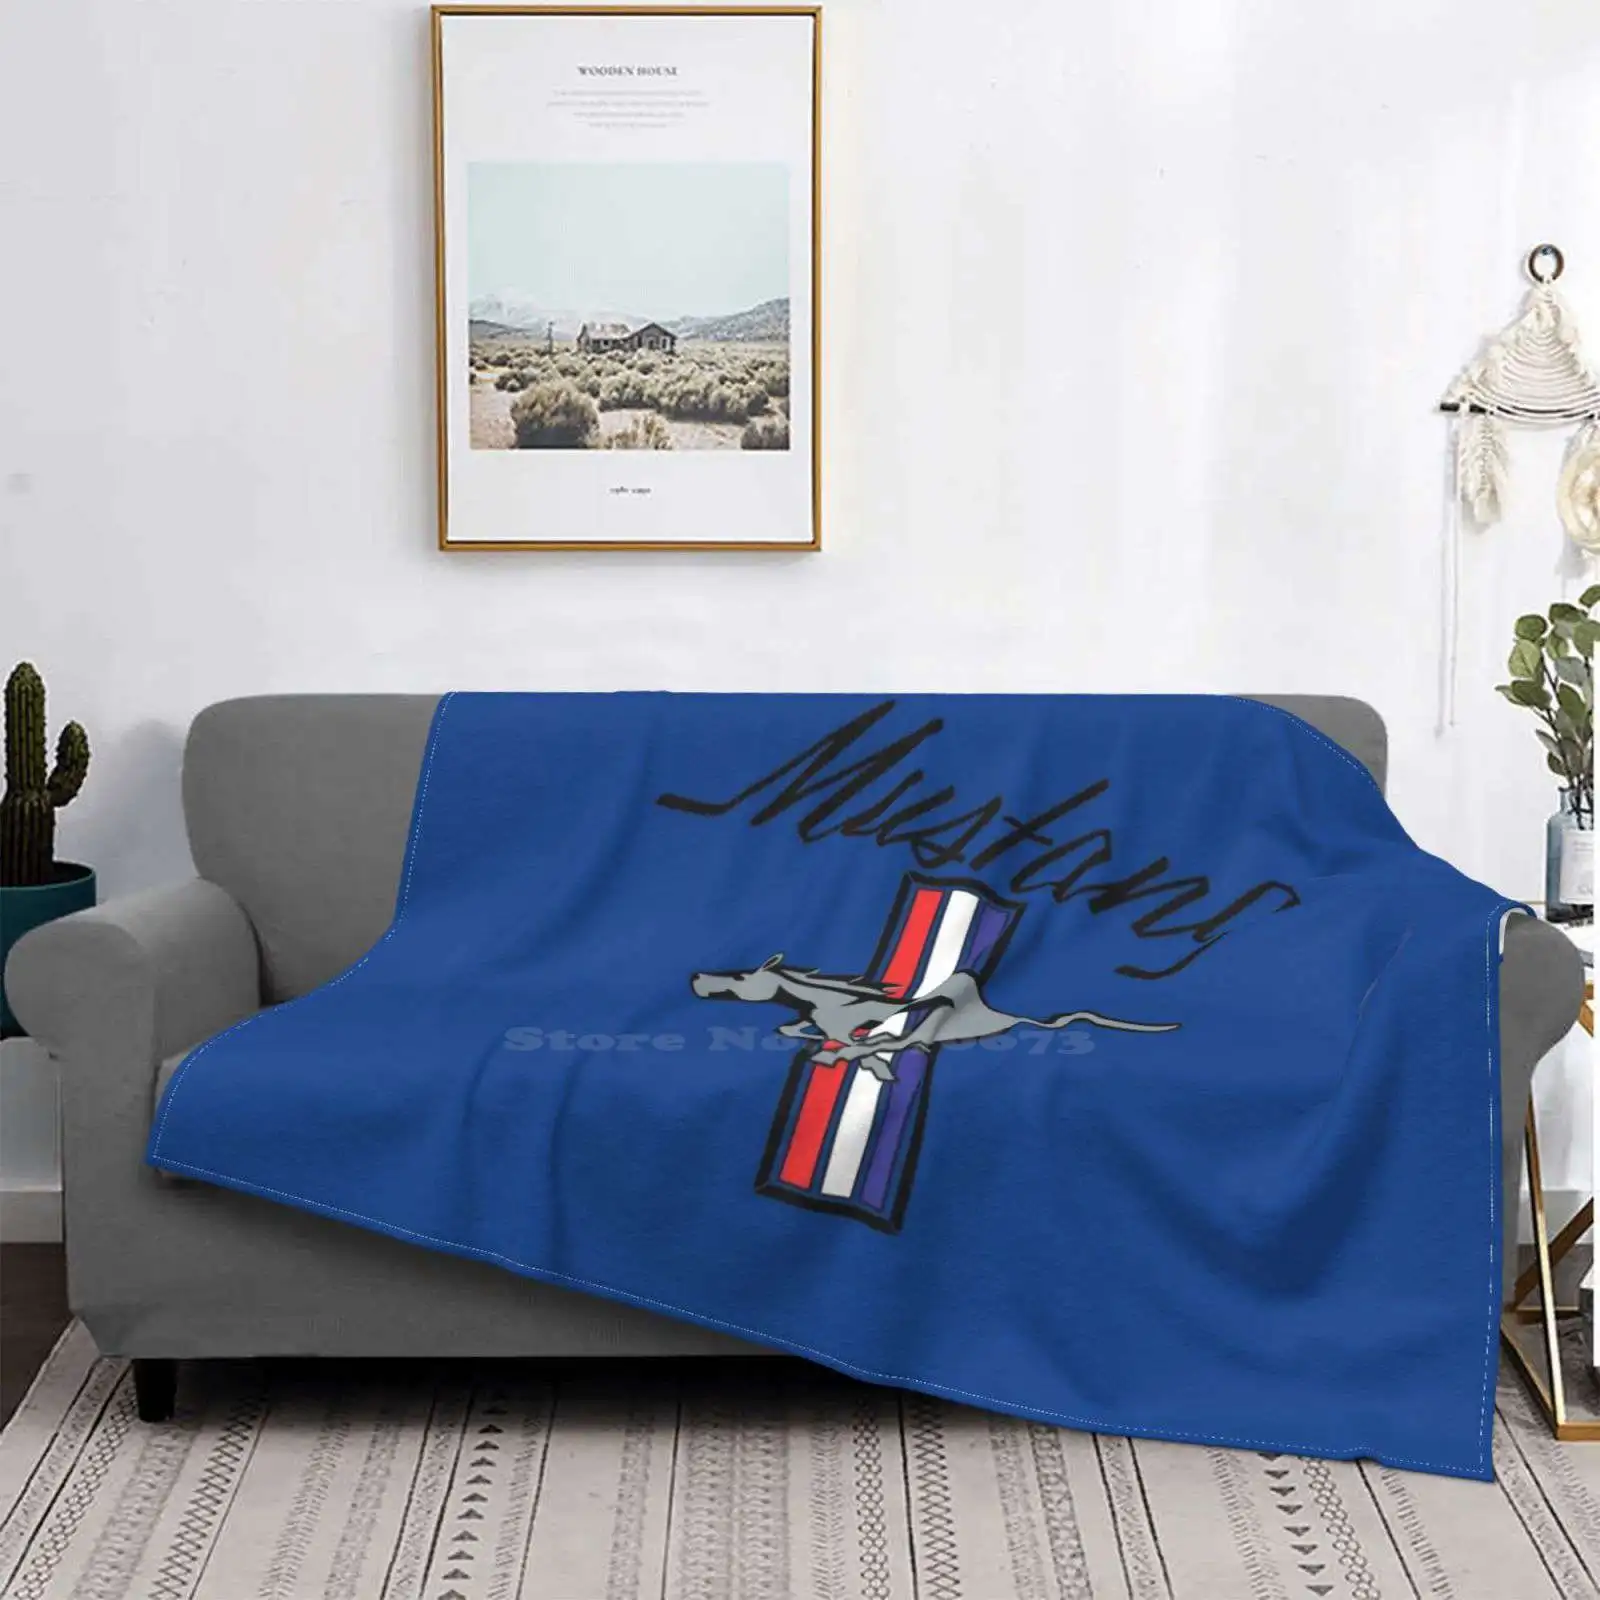 

Super Warm Flannel Blanket Thrown on The Sofa/bed/travel Detroit Lincoln Comet Car Muscle Retro Classic Car Racing